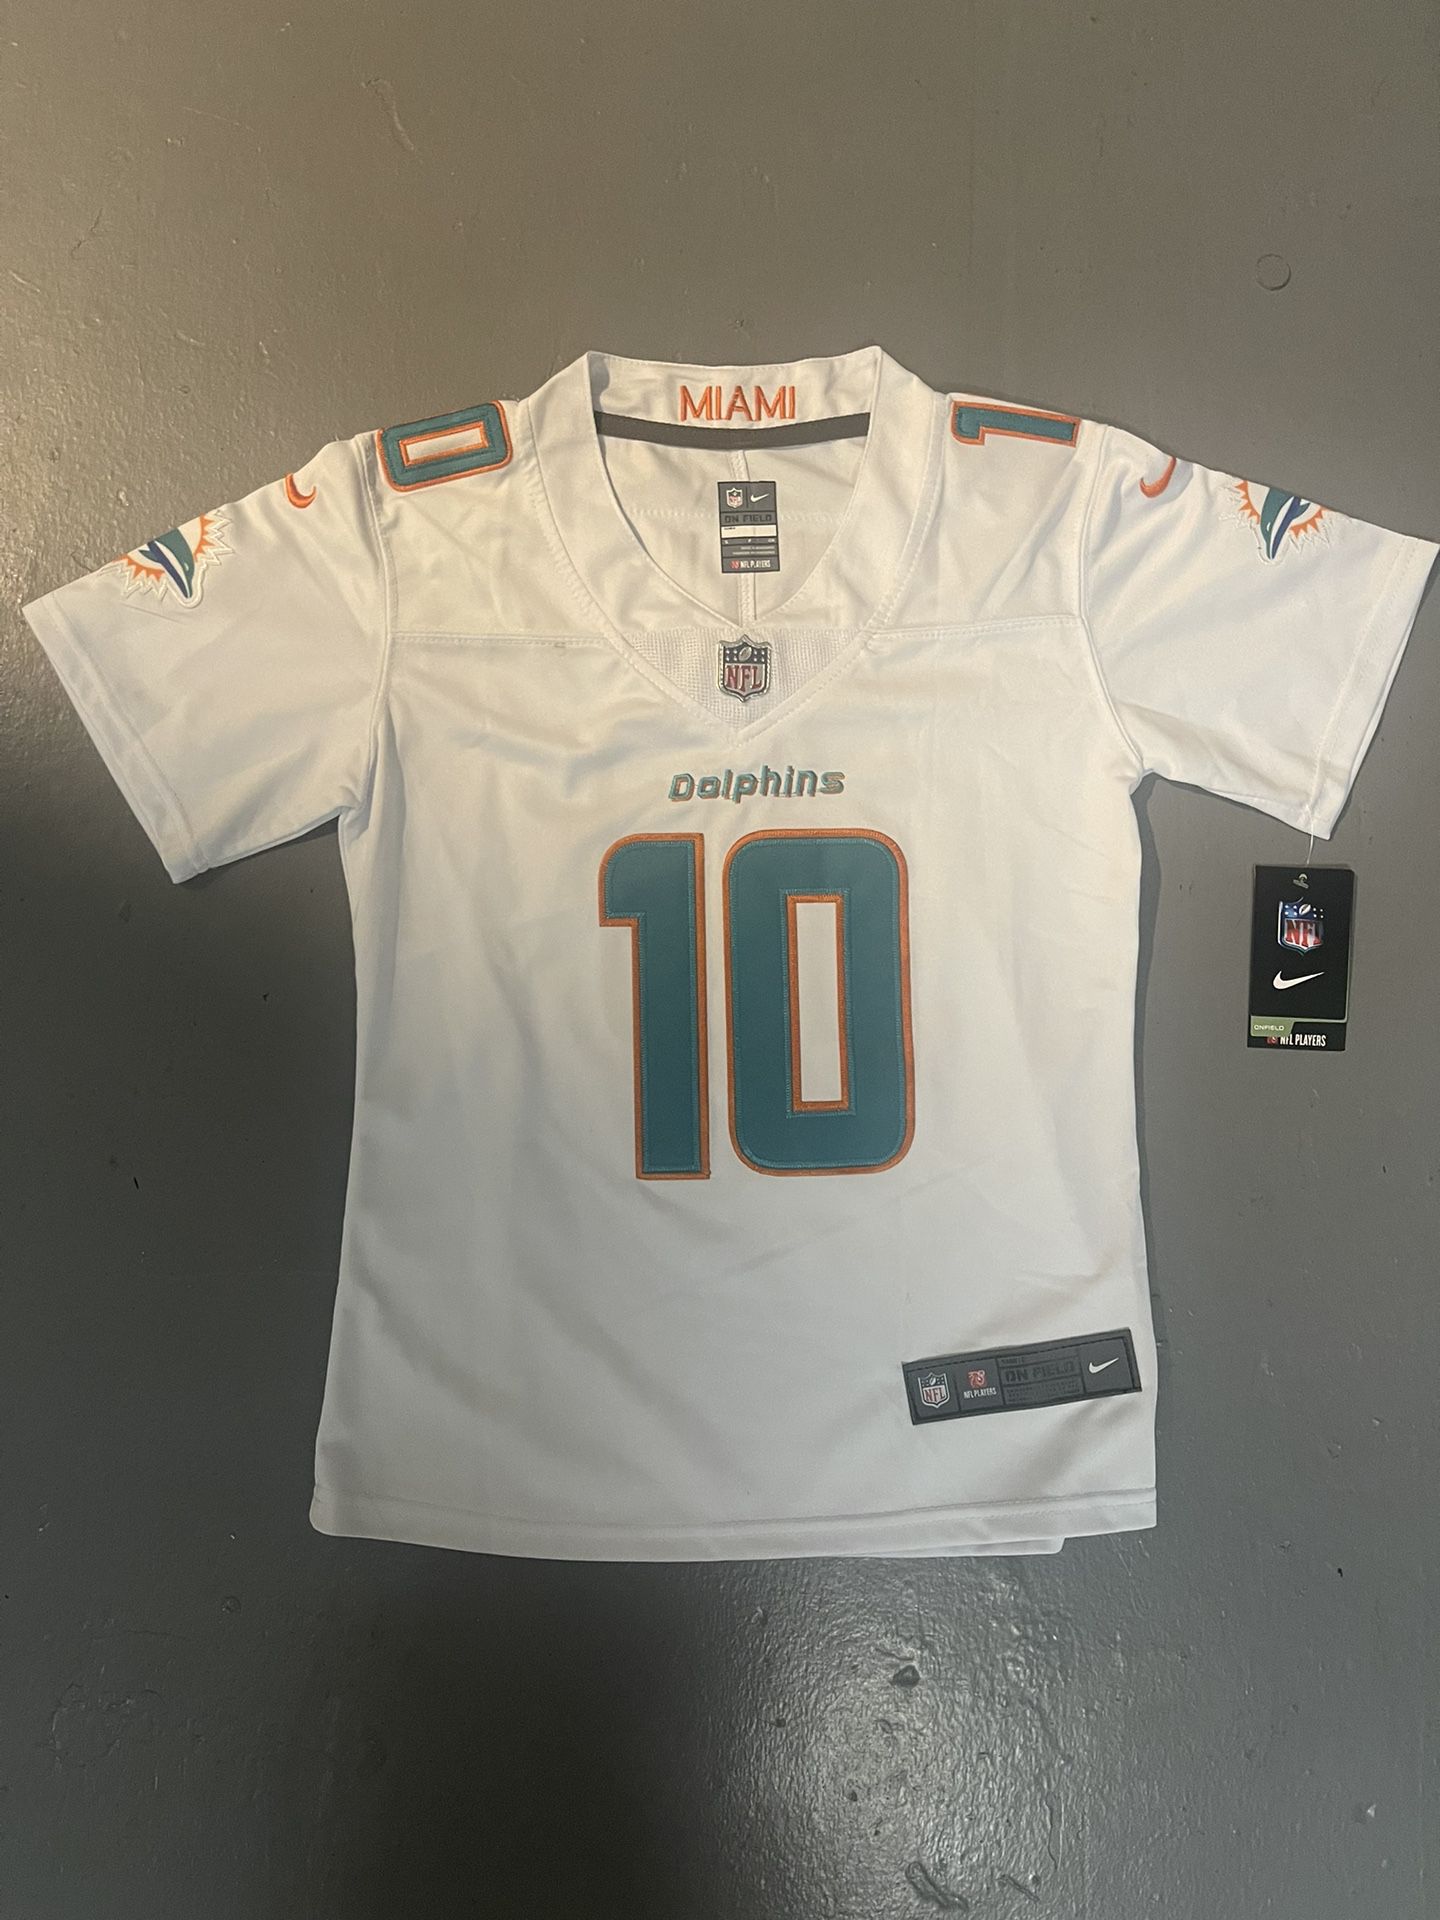 Miami Dolphins Youth Size Small Jersey 